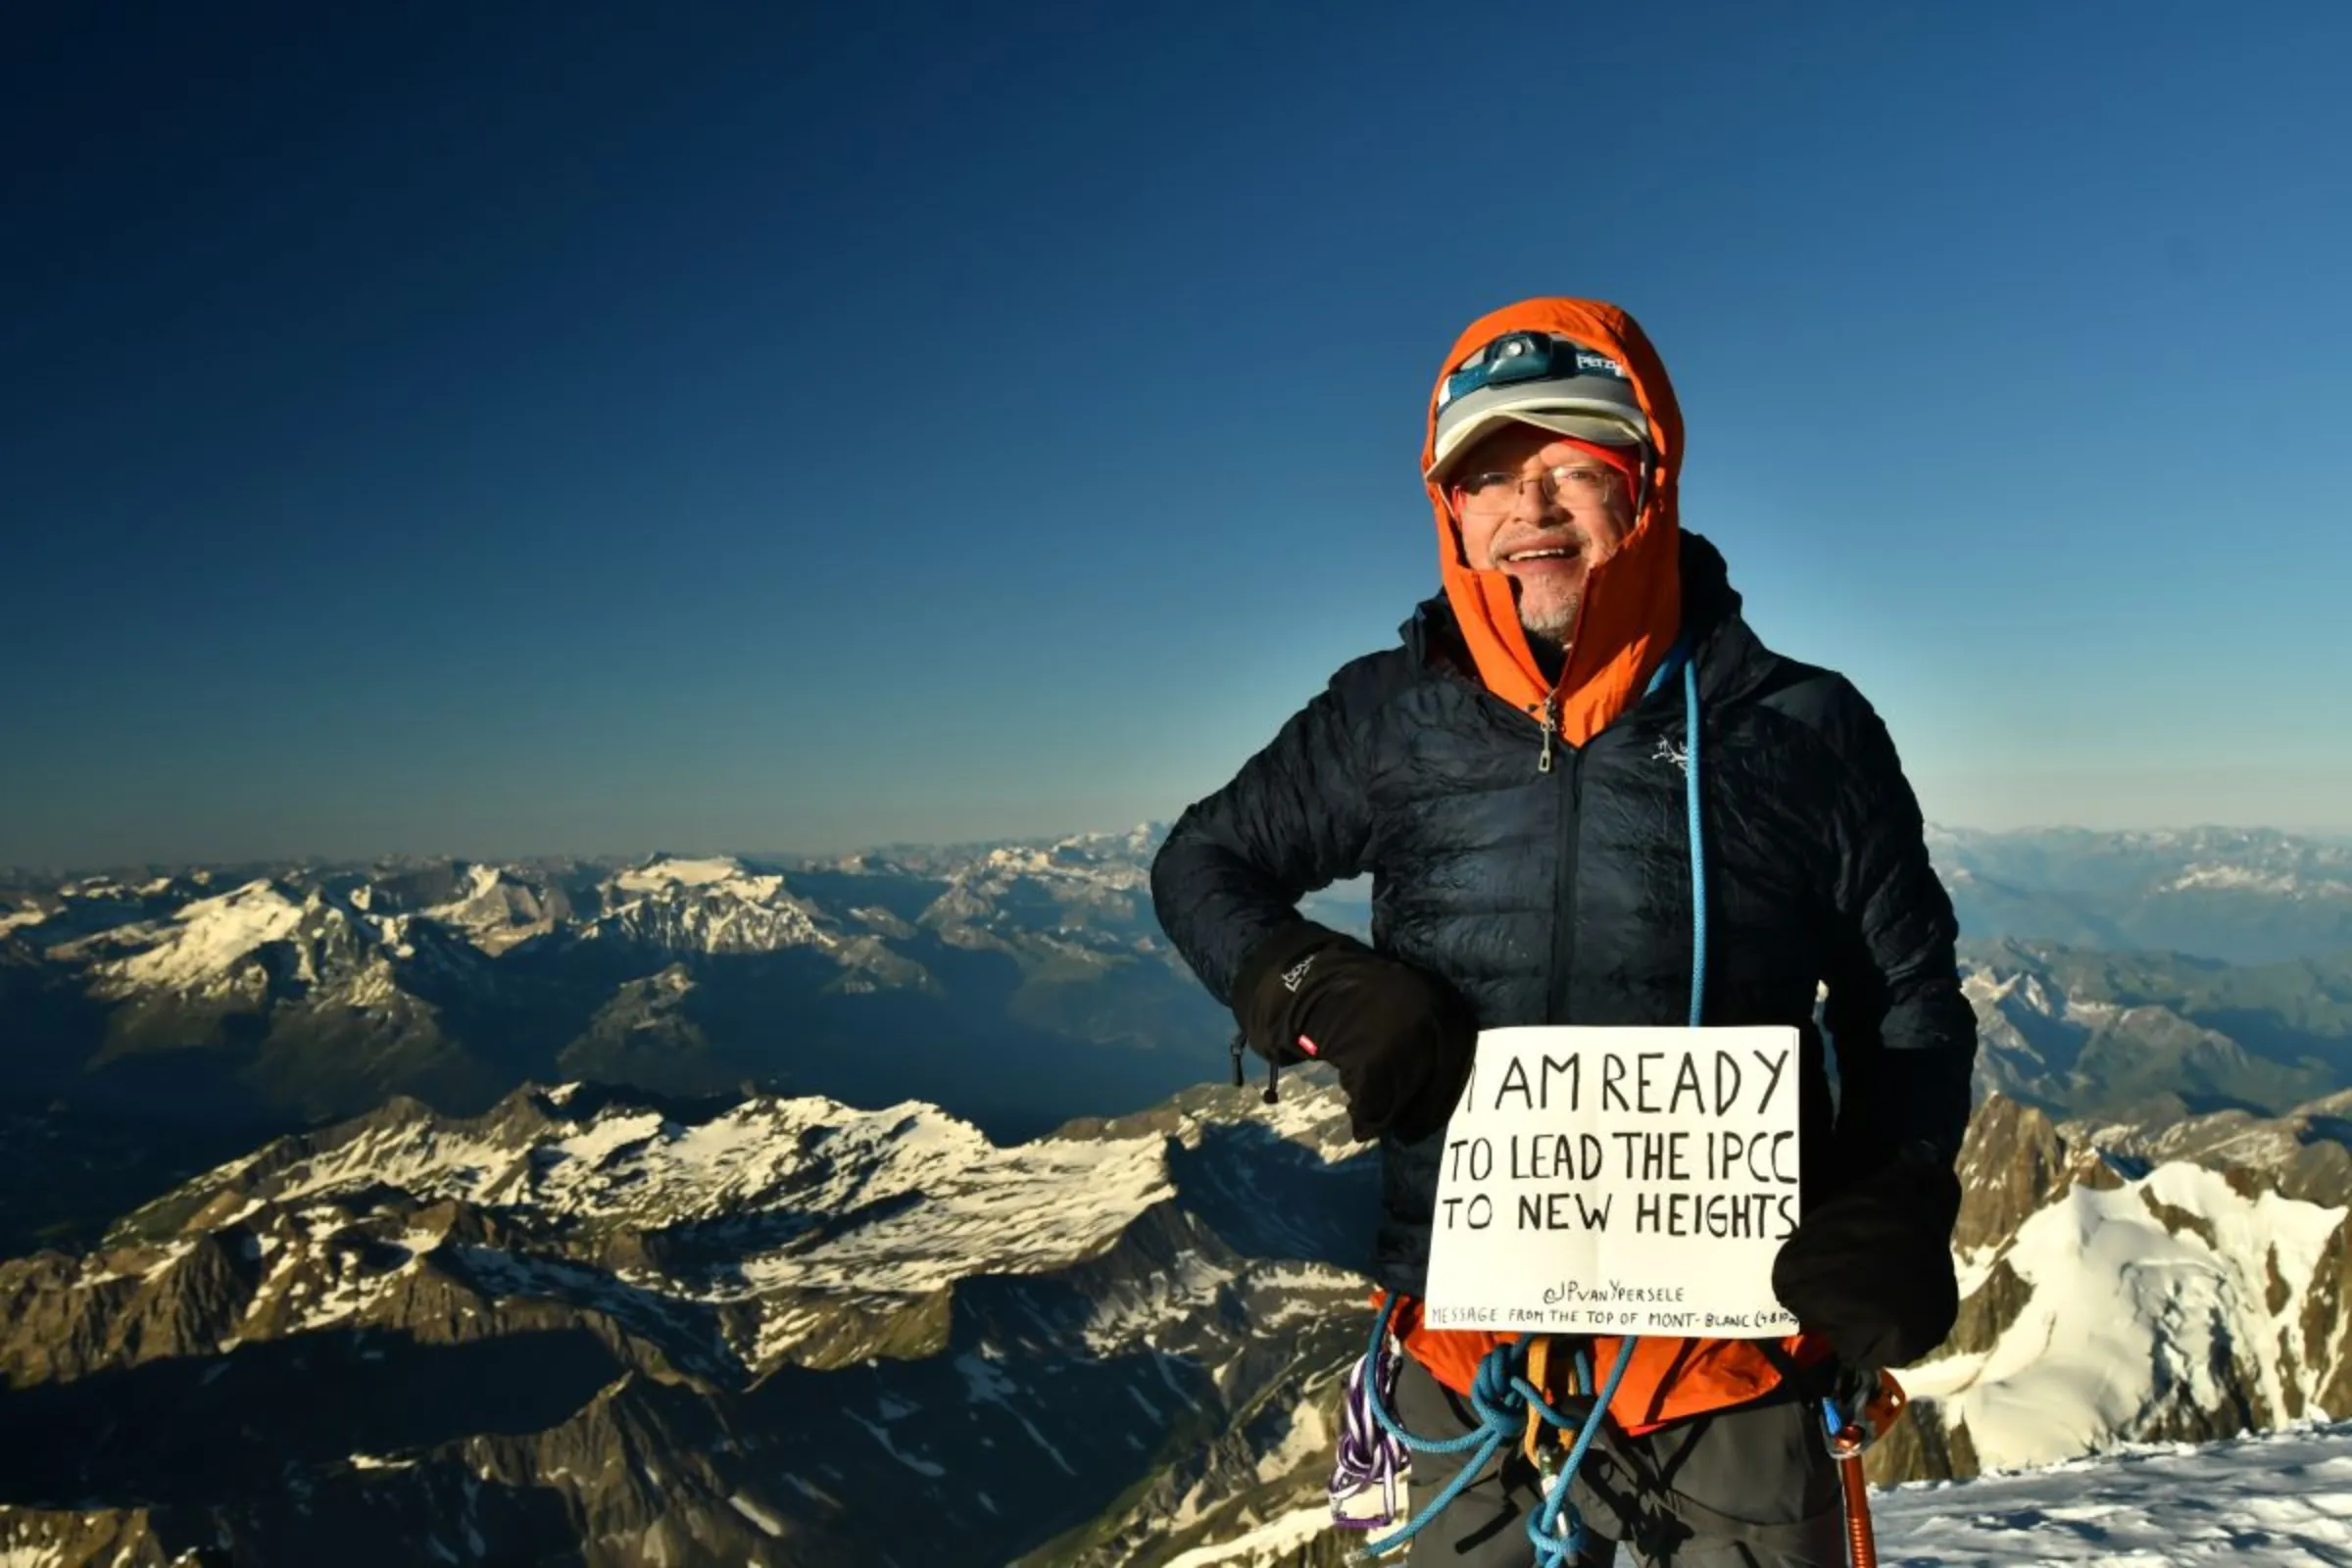 Jean-Pascal van Ypersele, a Belgian professor of environmental sciences and candidate to lead the U.N.’s Intergovernmental Panel on Climate Change, stands atop Mont Blanc in 2020 with a banner reading “I am ready to lead the IPCC to new heights”